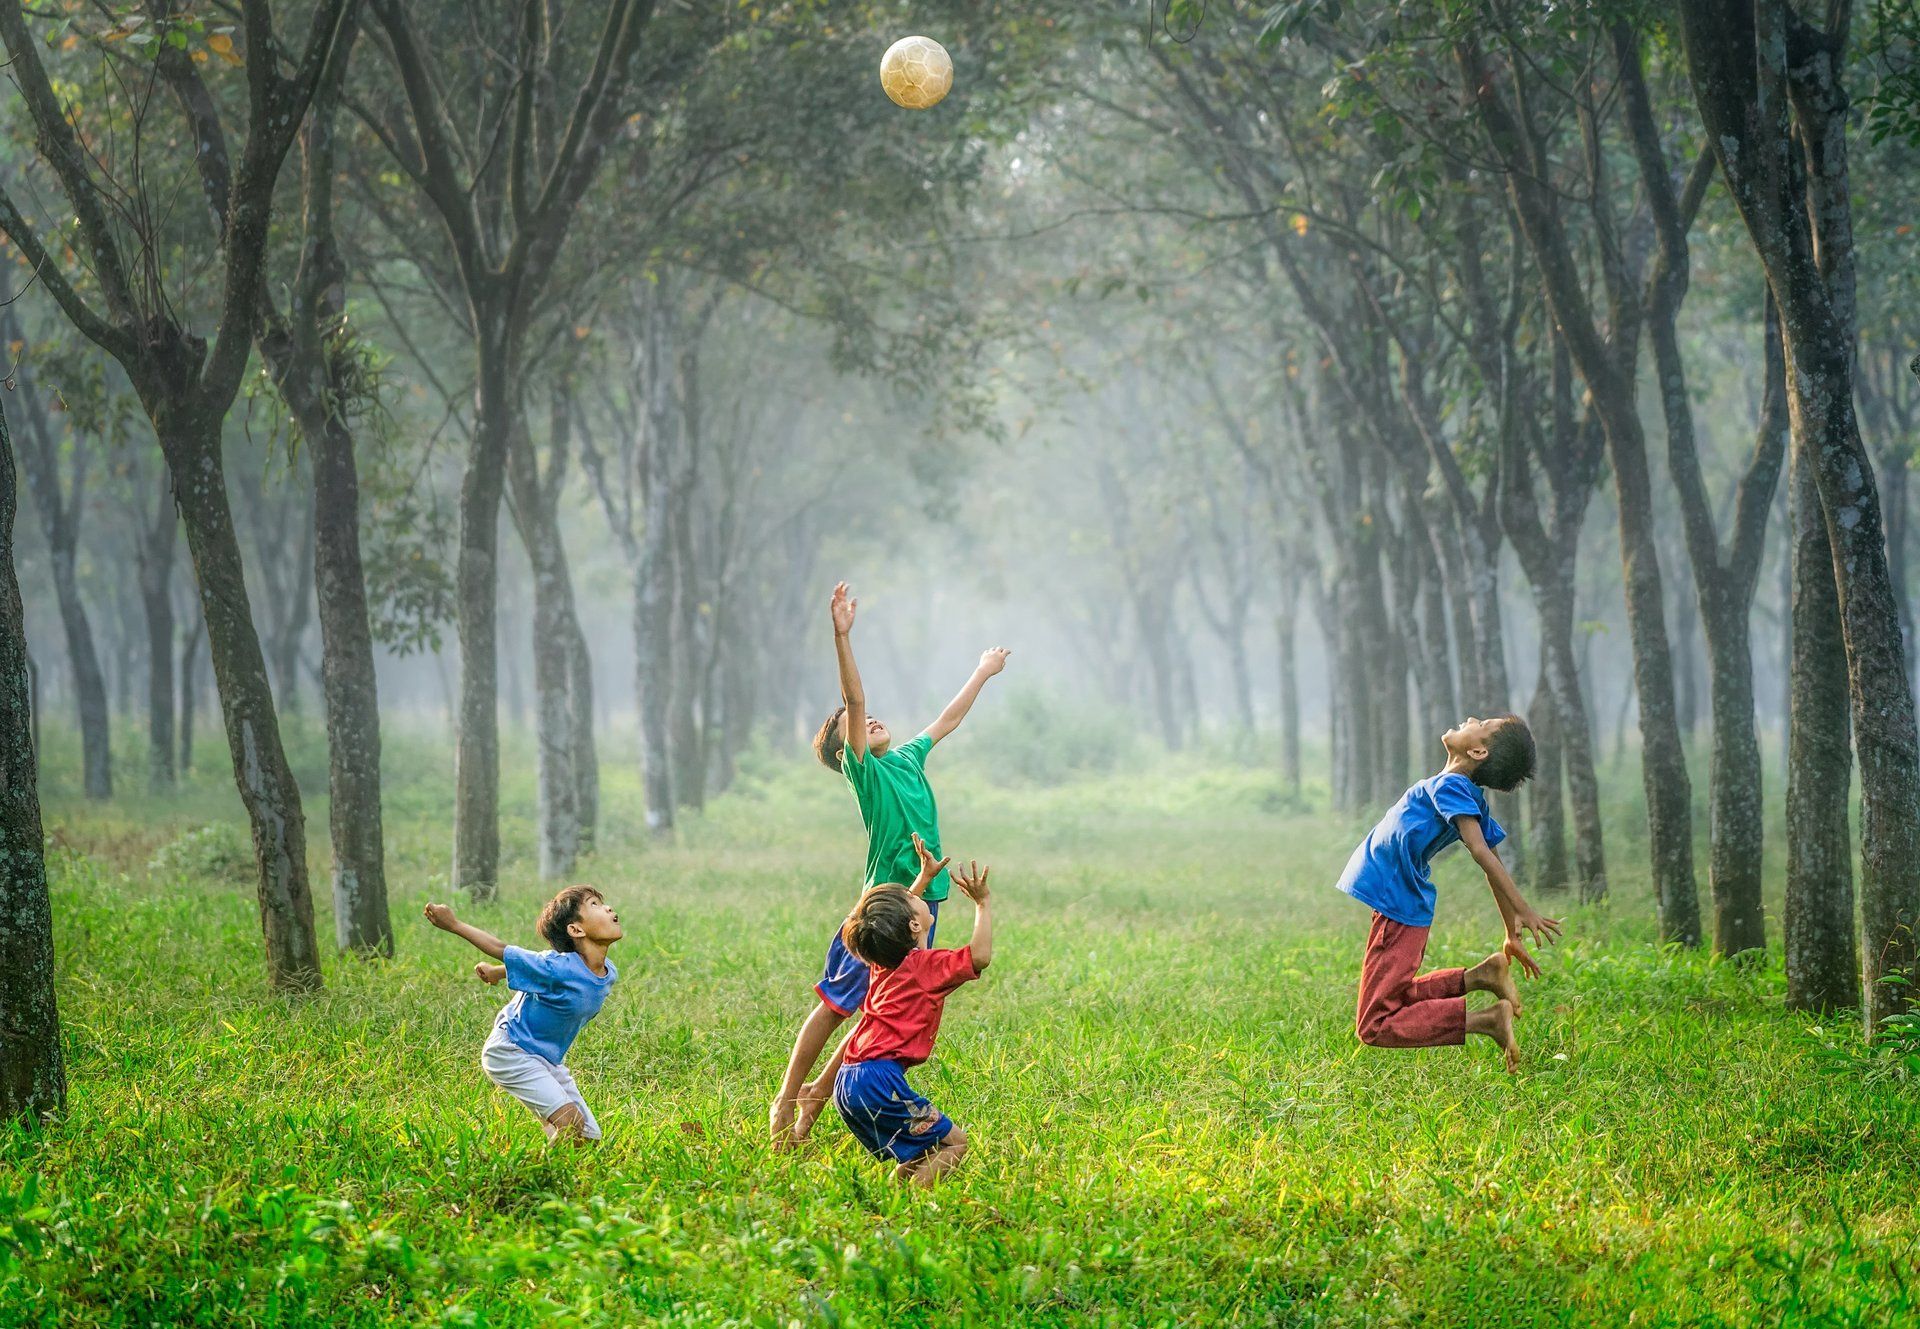 Children playing in tree lined meadow Credit: Robert Collins at Unsplash